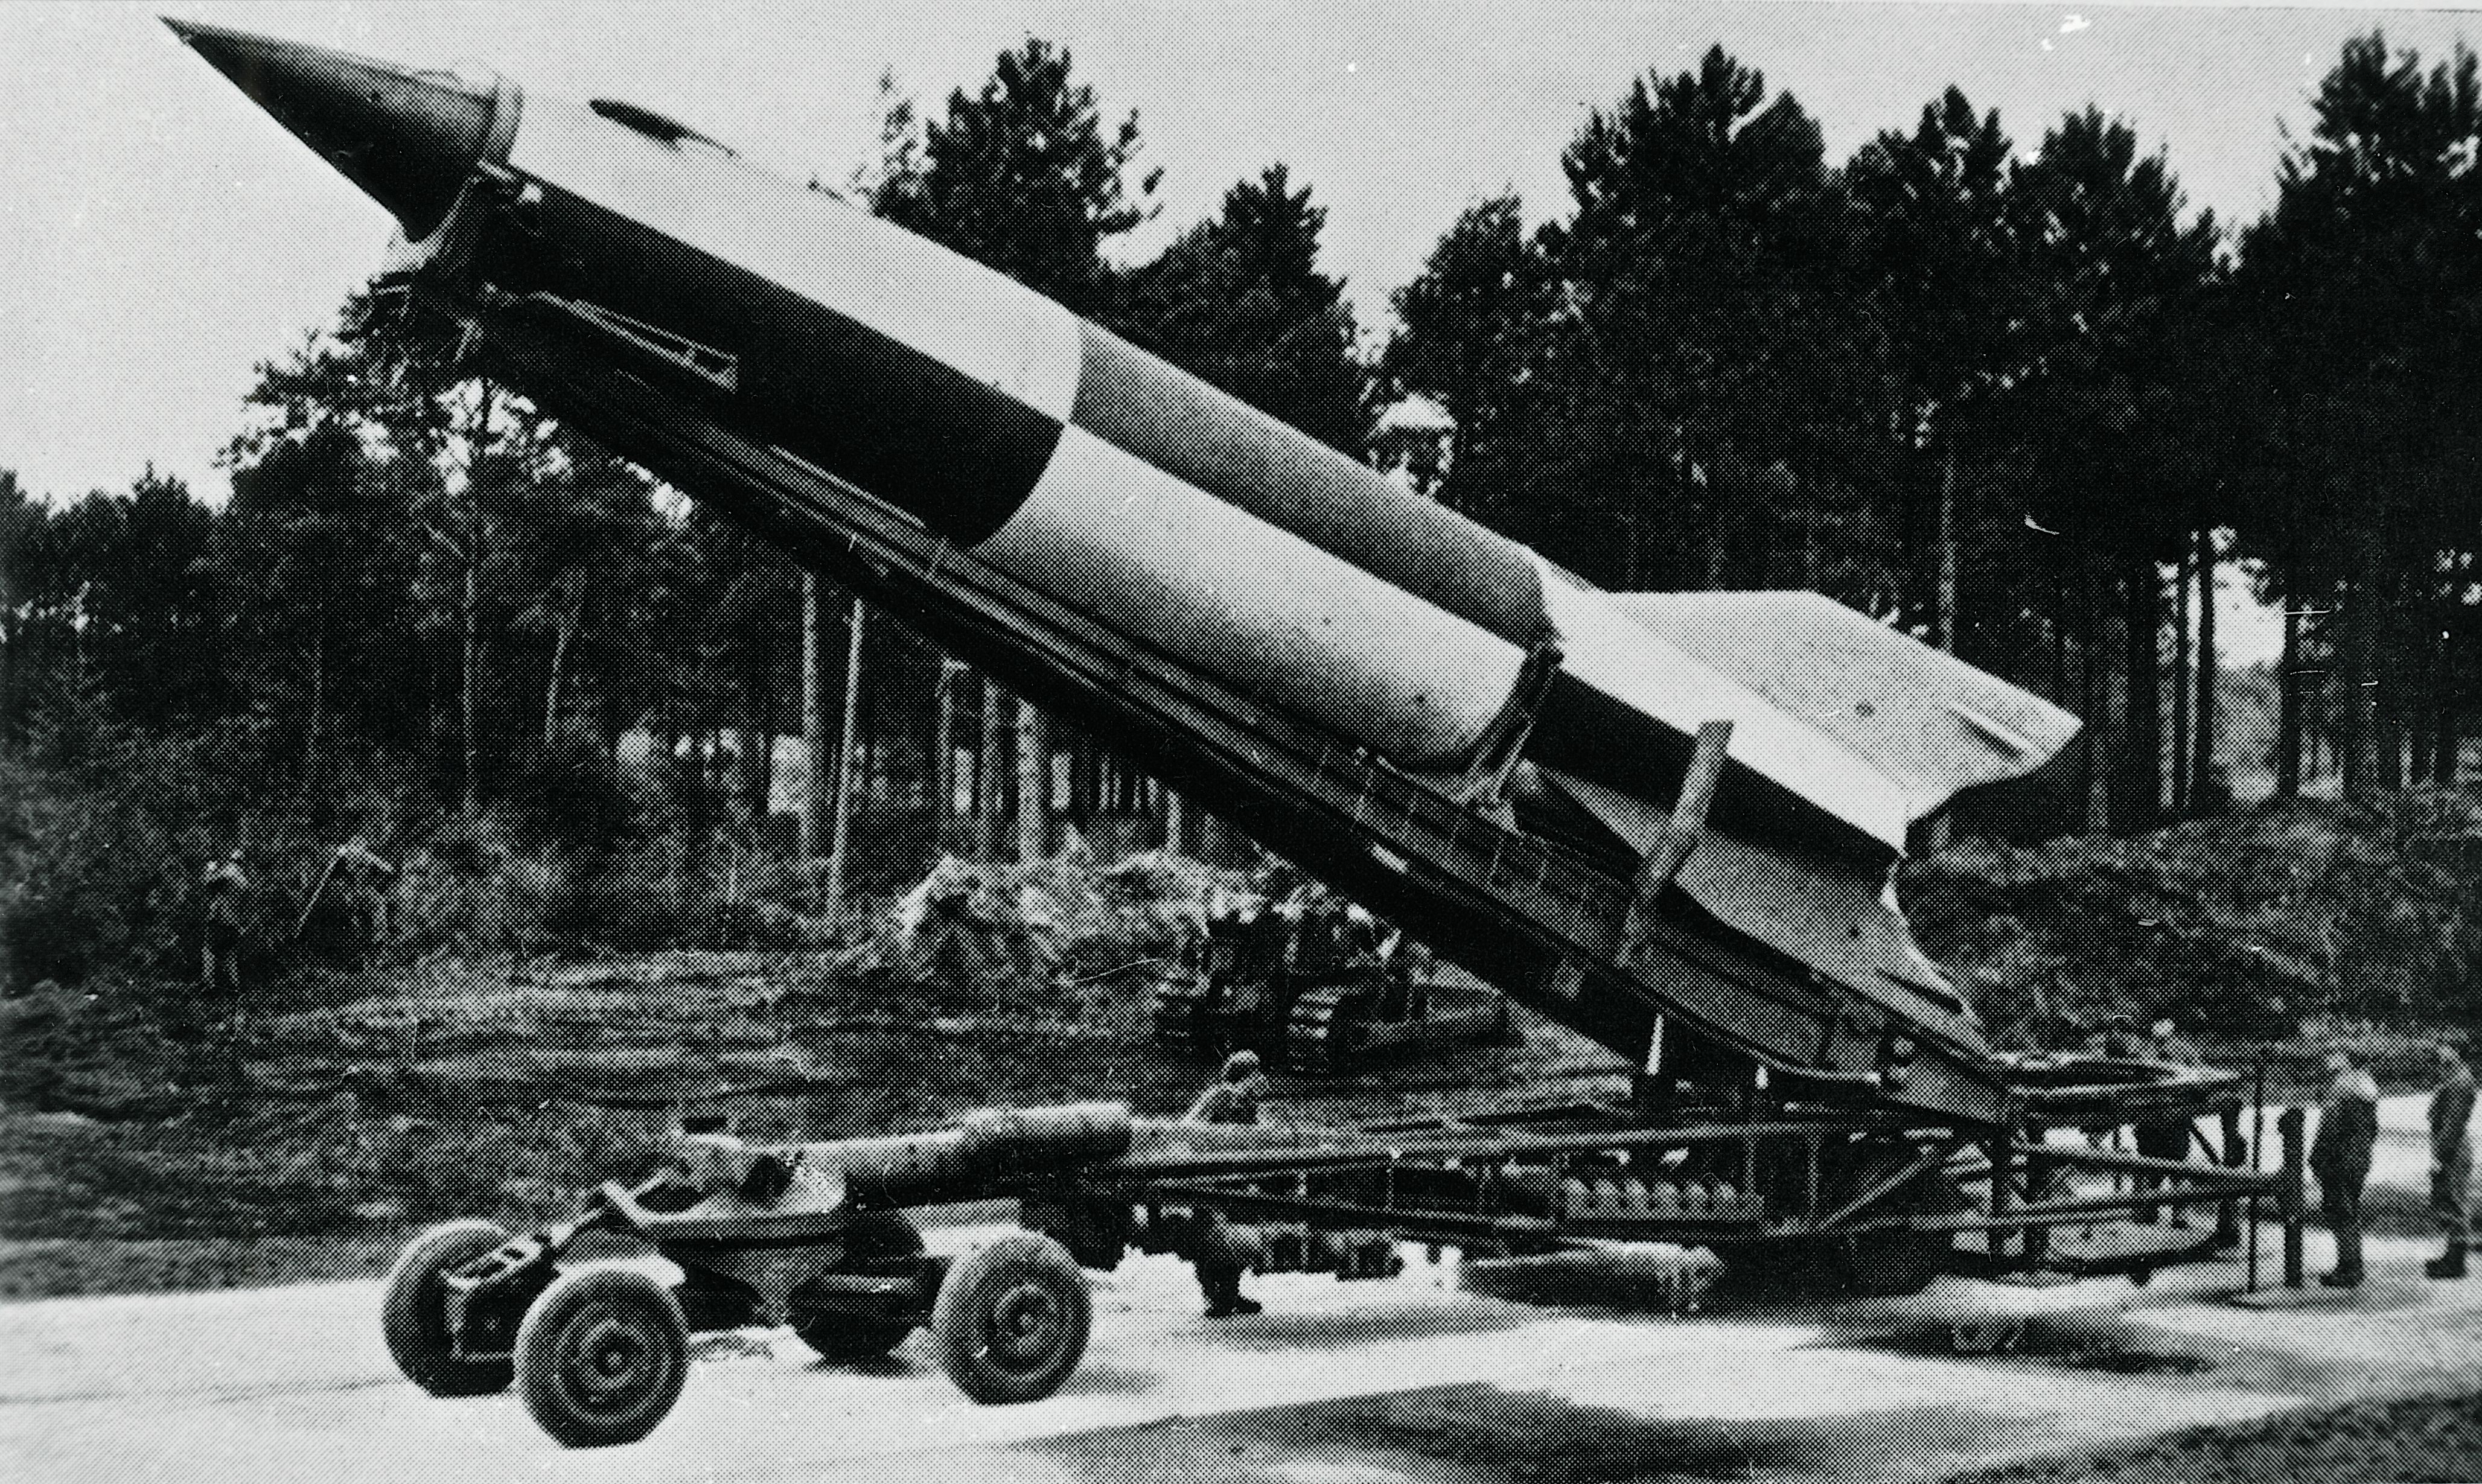 A V-2 rocket captured by the Allies, c. 1945. The site at Peenemünde where Devyatayev was forced to work was used for the testing and development of V-2 rockets. / Museum of Danish Resistance Archive